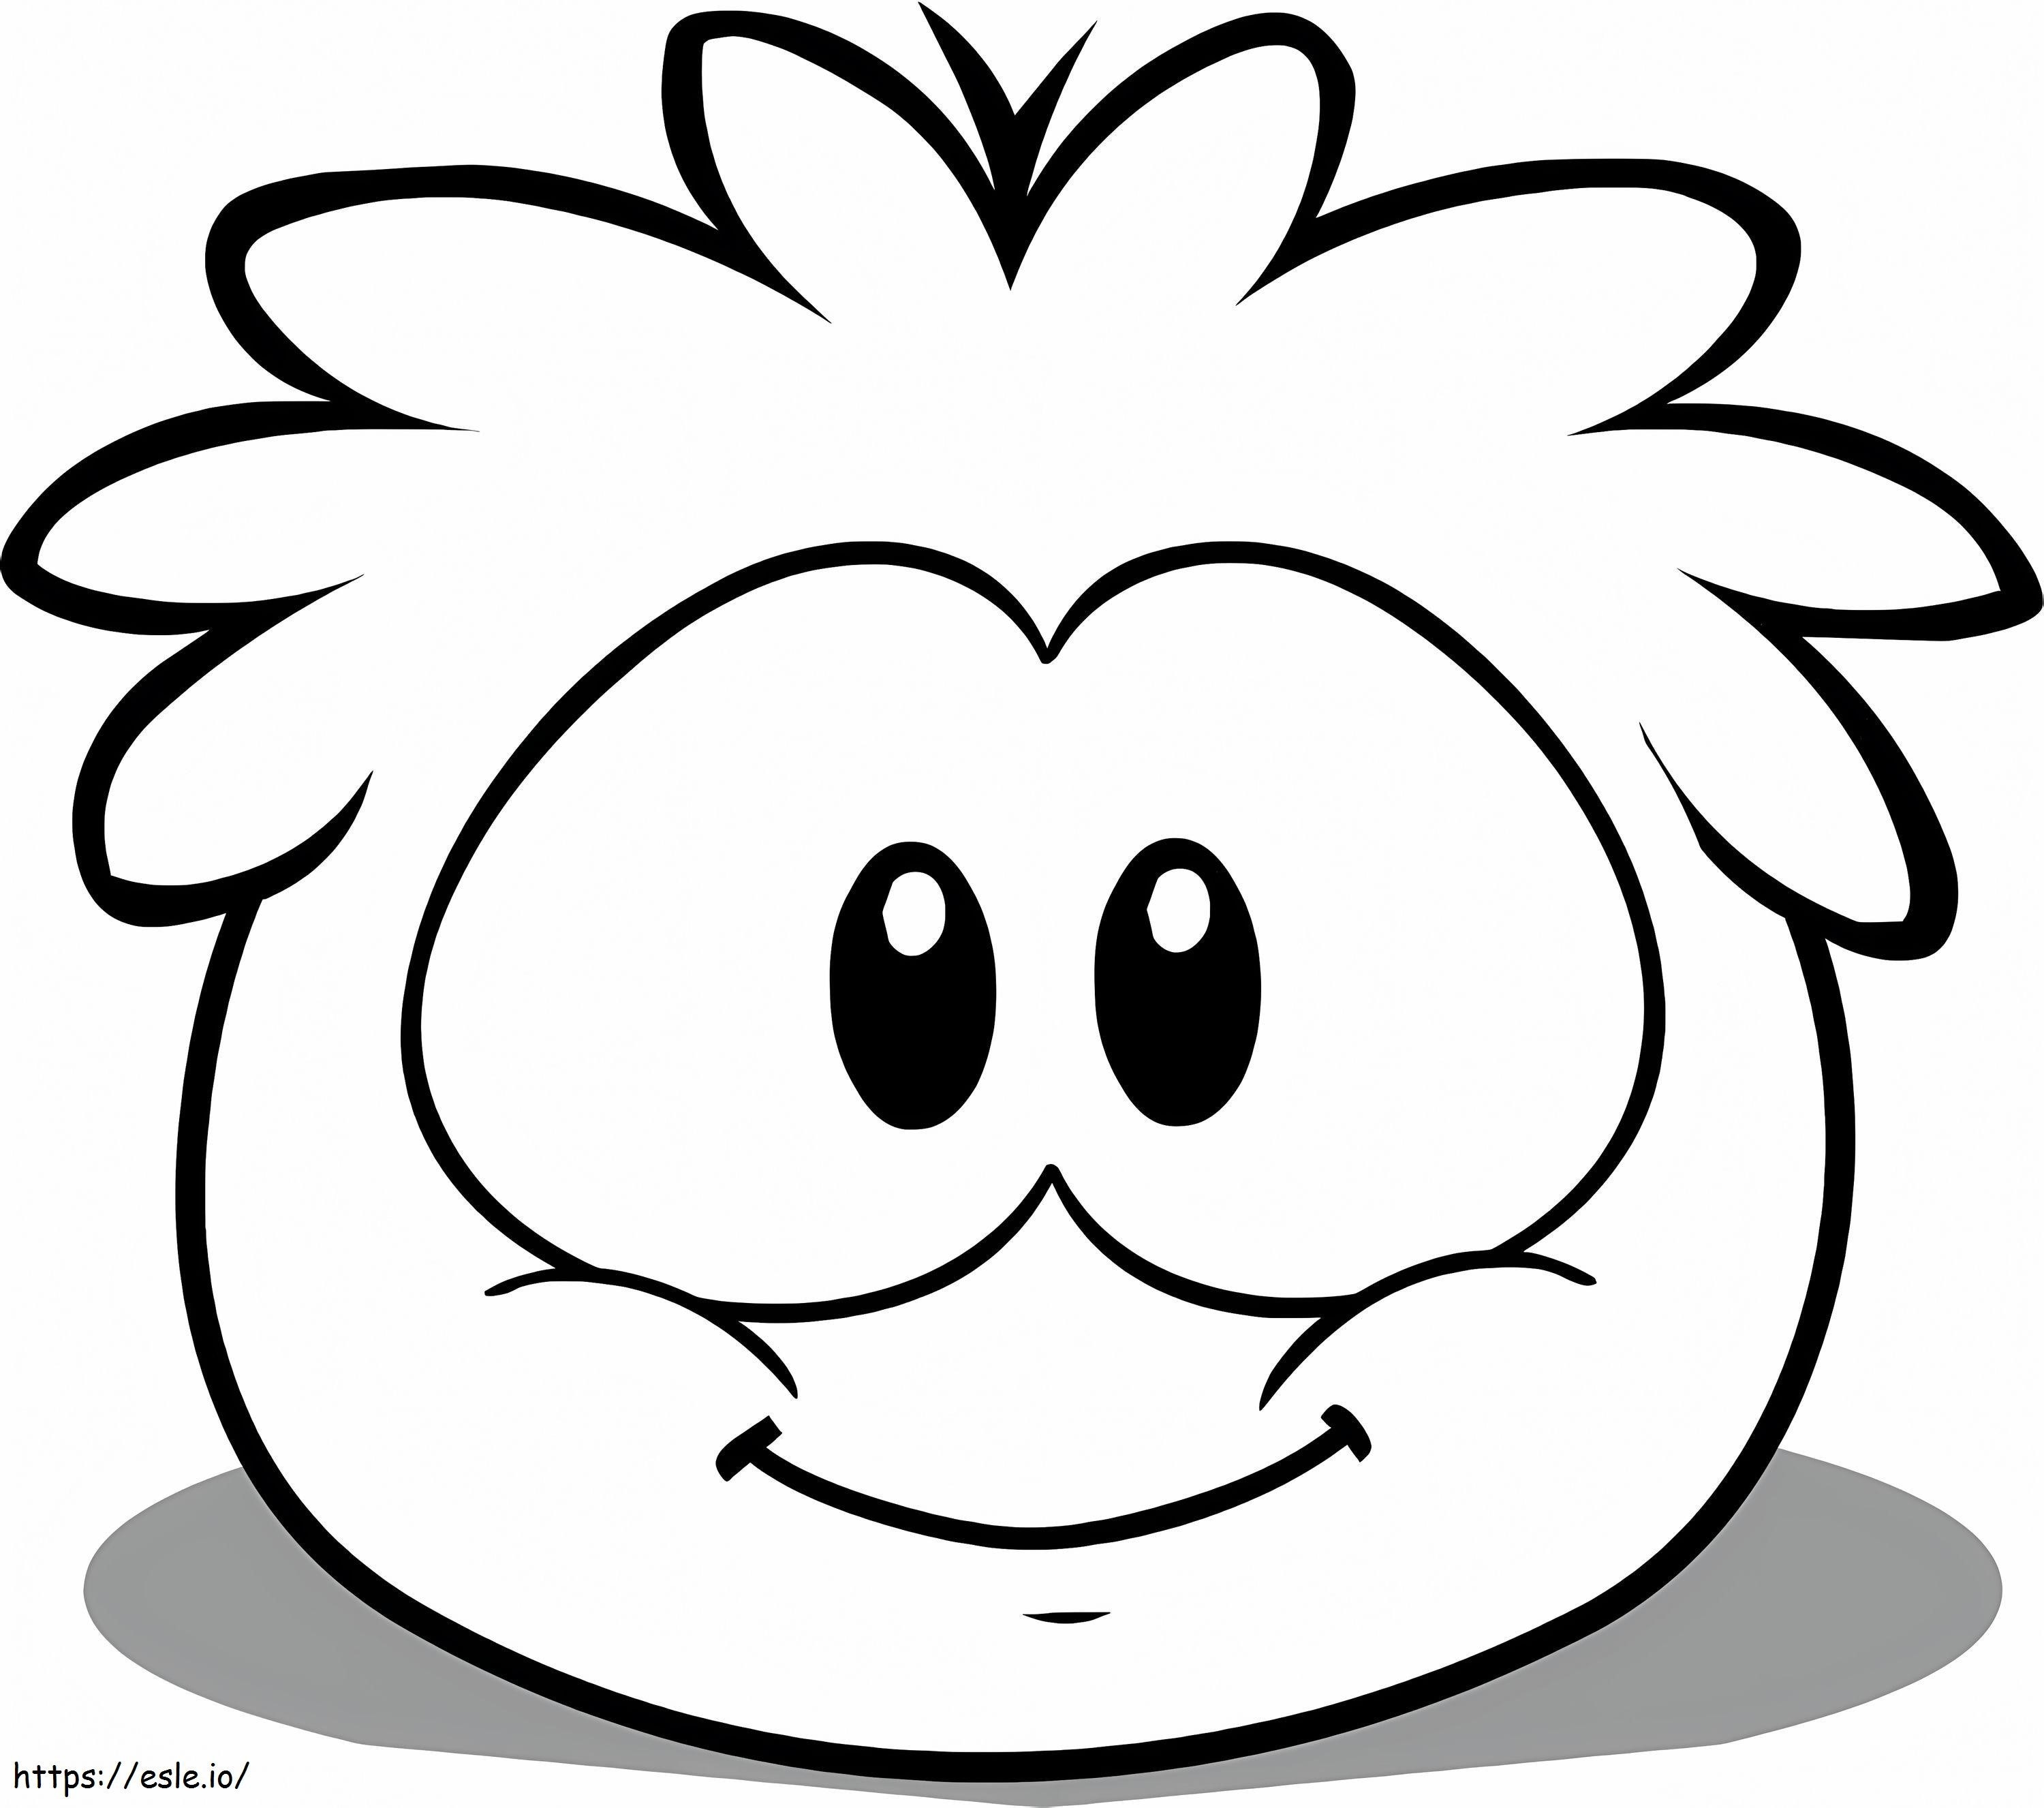 Club Penguin Puffle coloring page